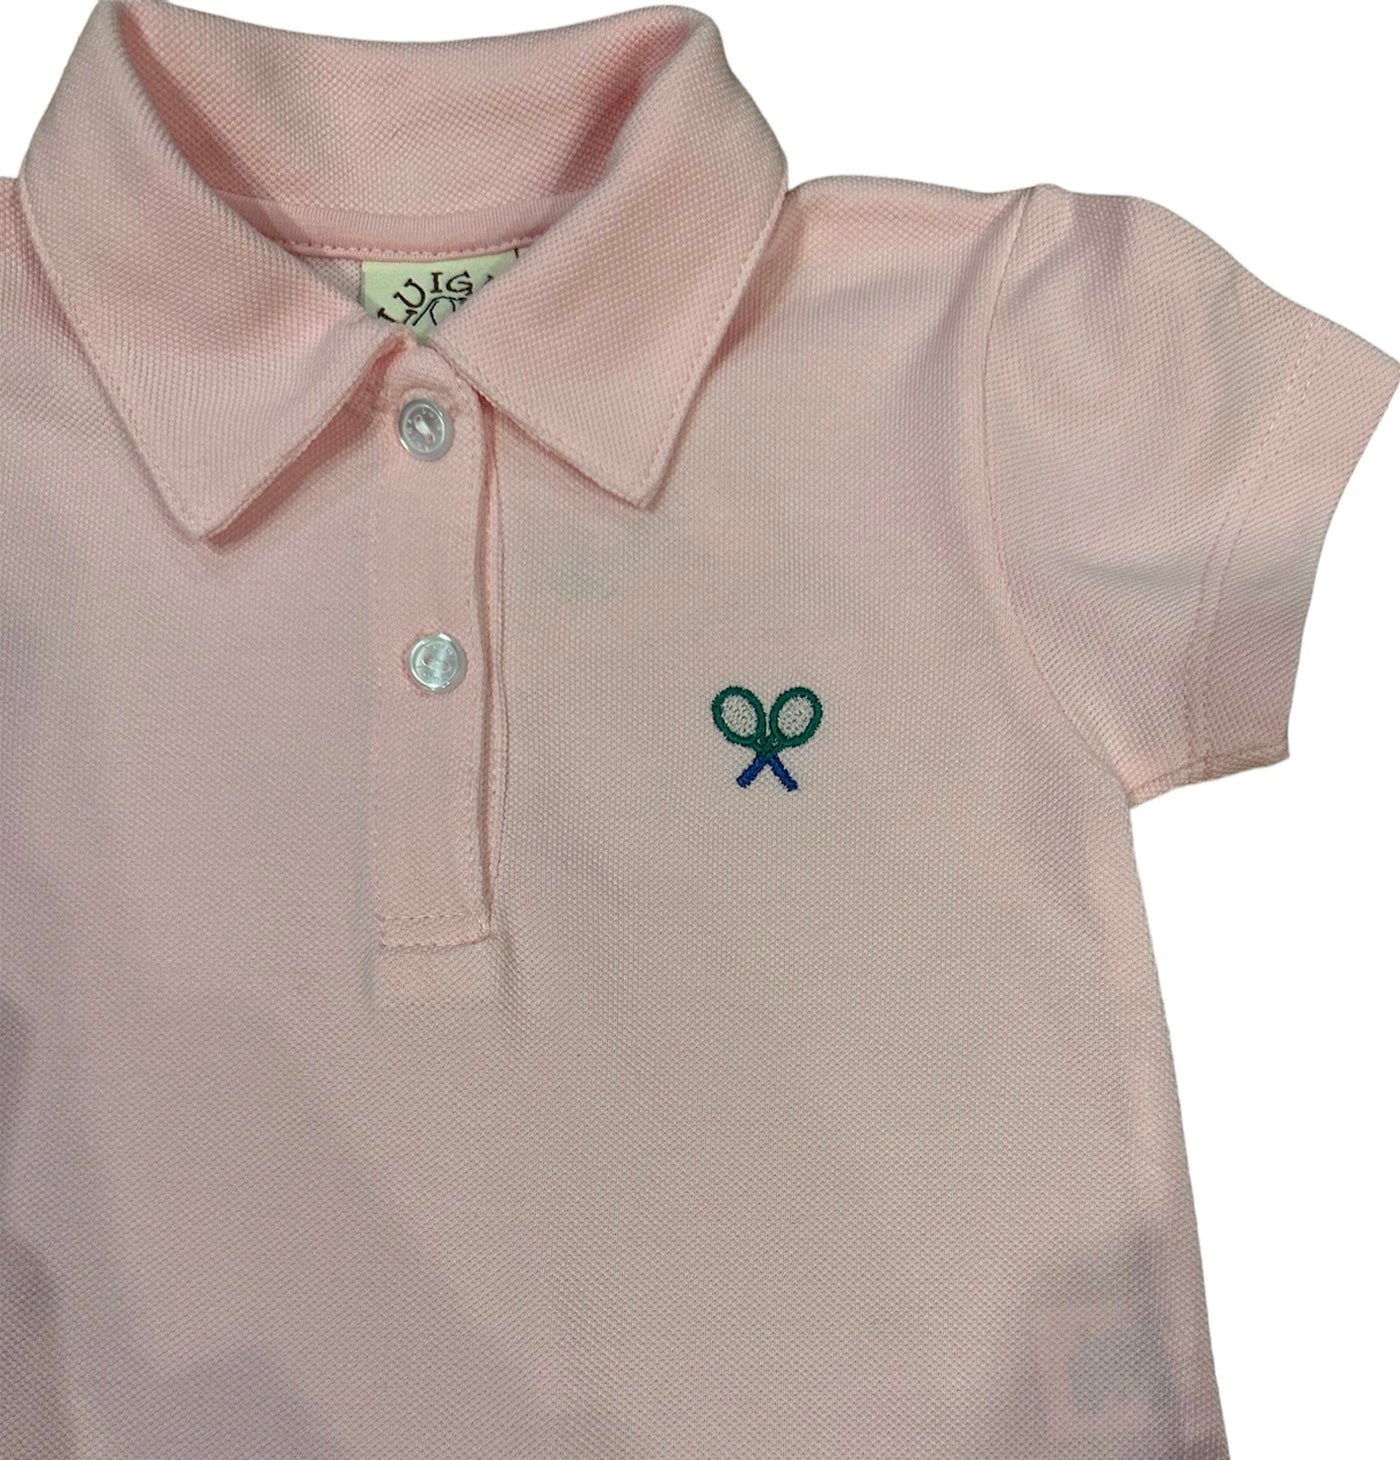 Pique Pink Polo Tennis Dress with Tennis Racquets Embroidery